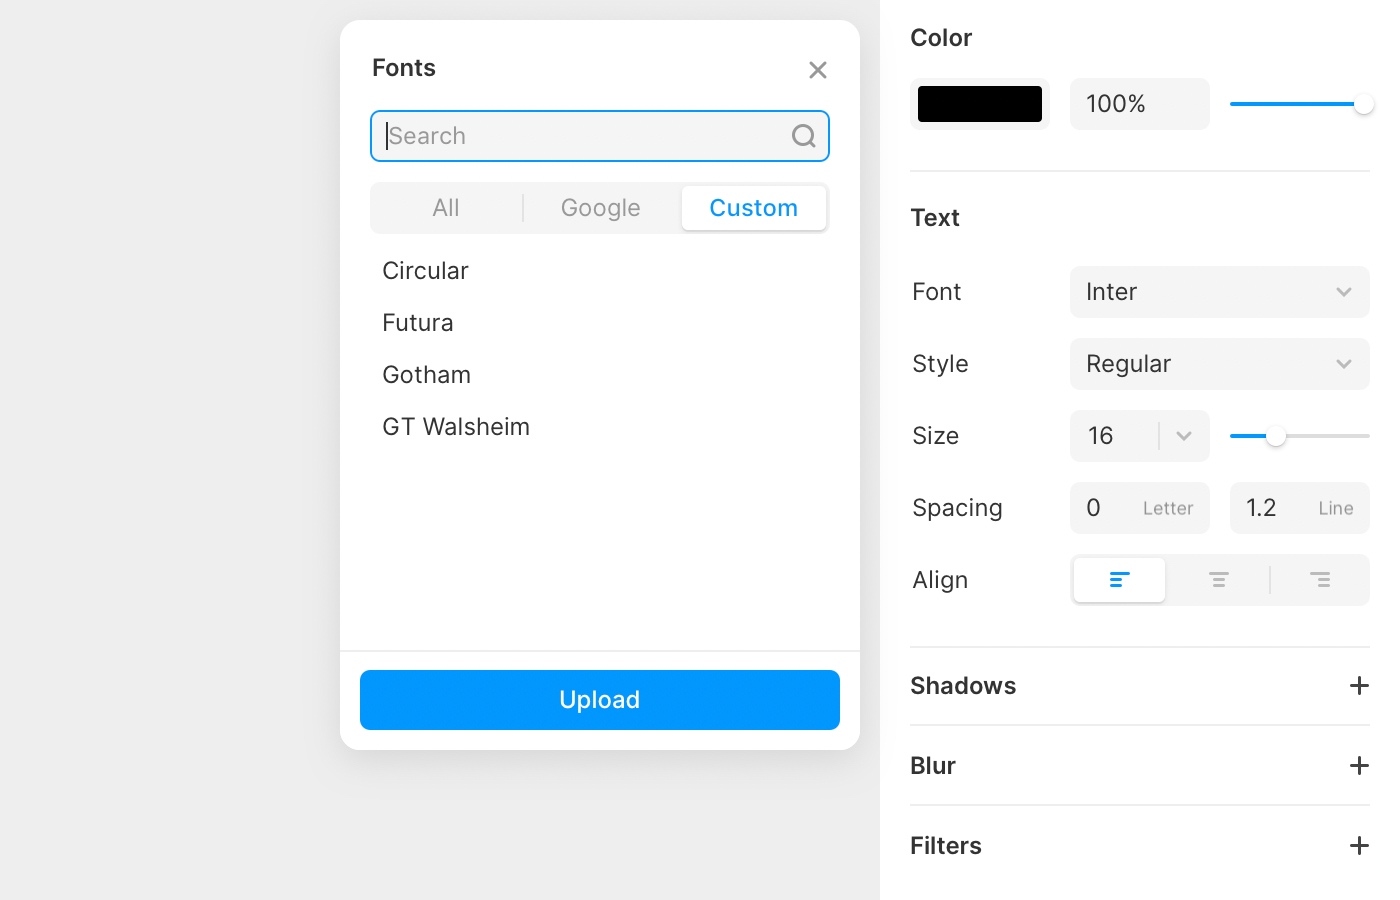 Upload a custom font from the font picker